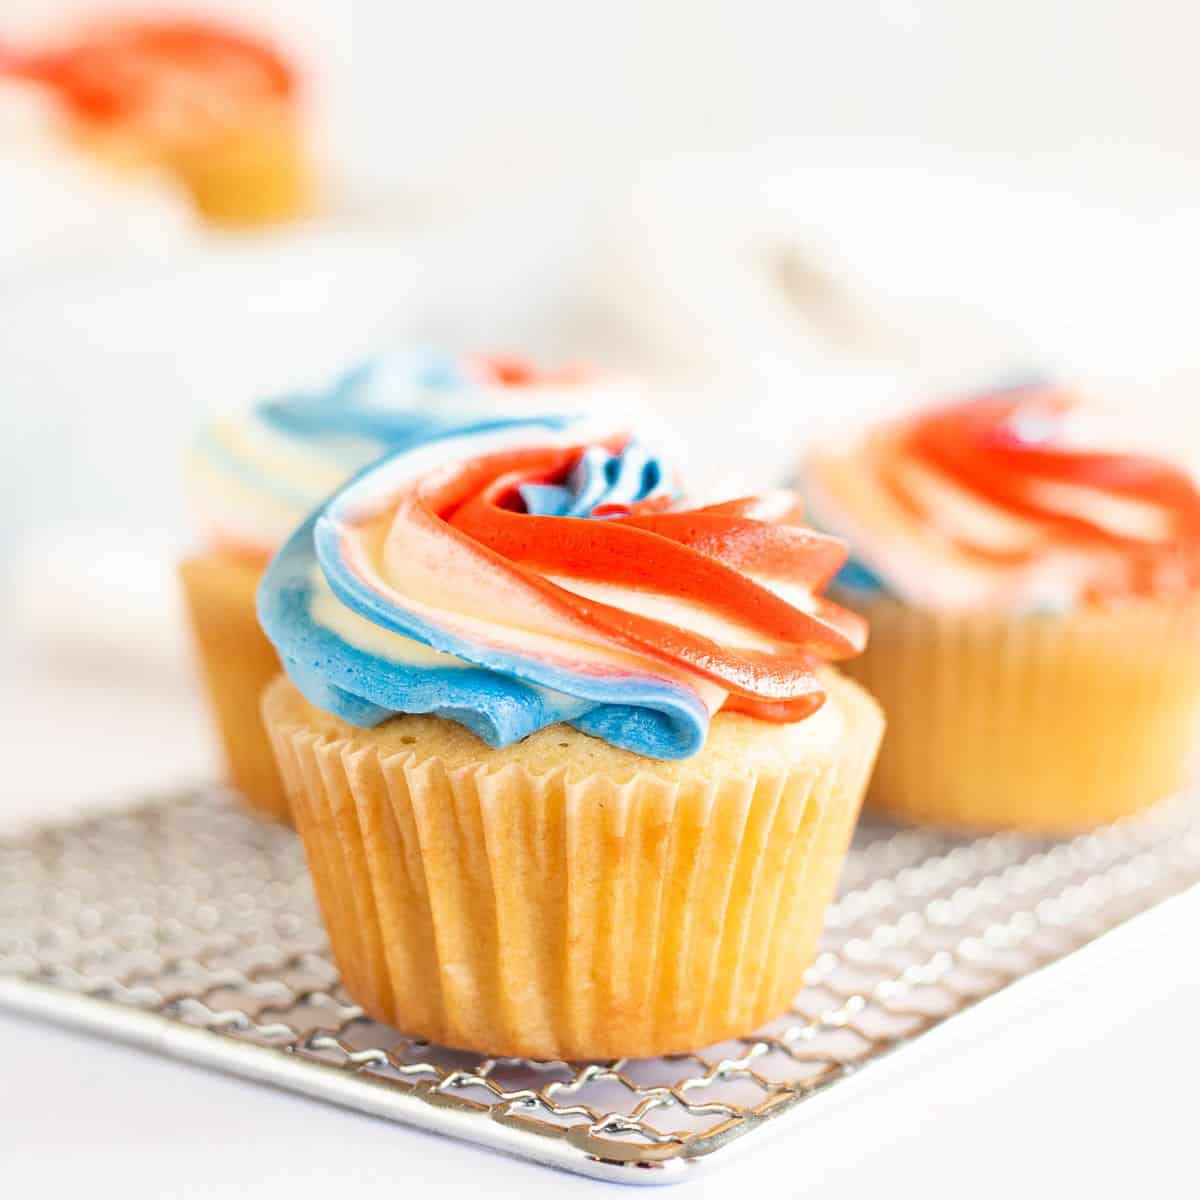 patriotic cupcakes on a metal rack on a white background.